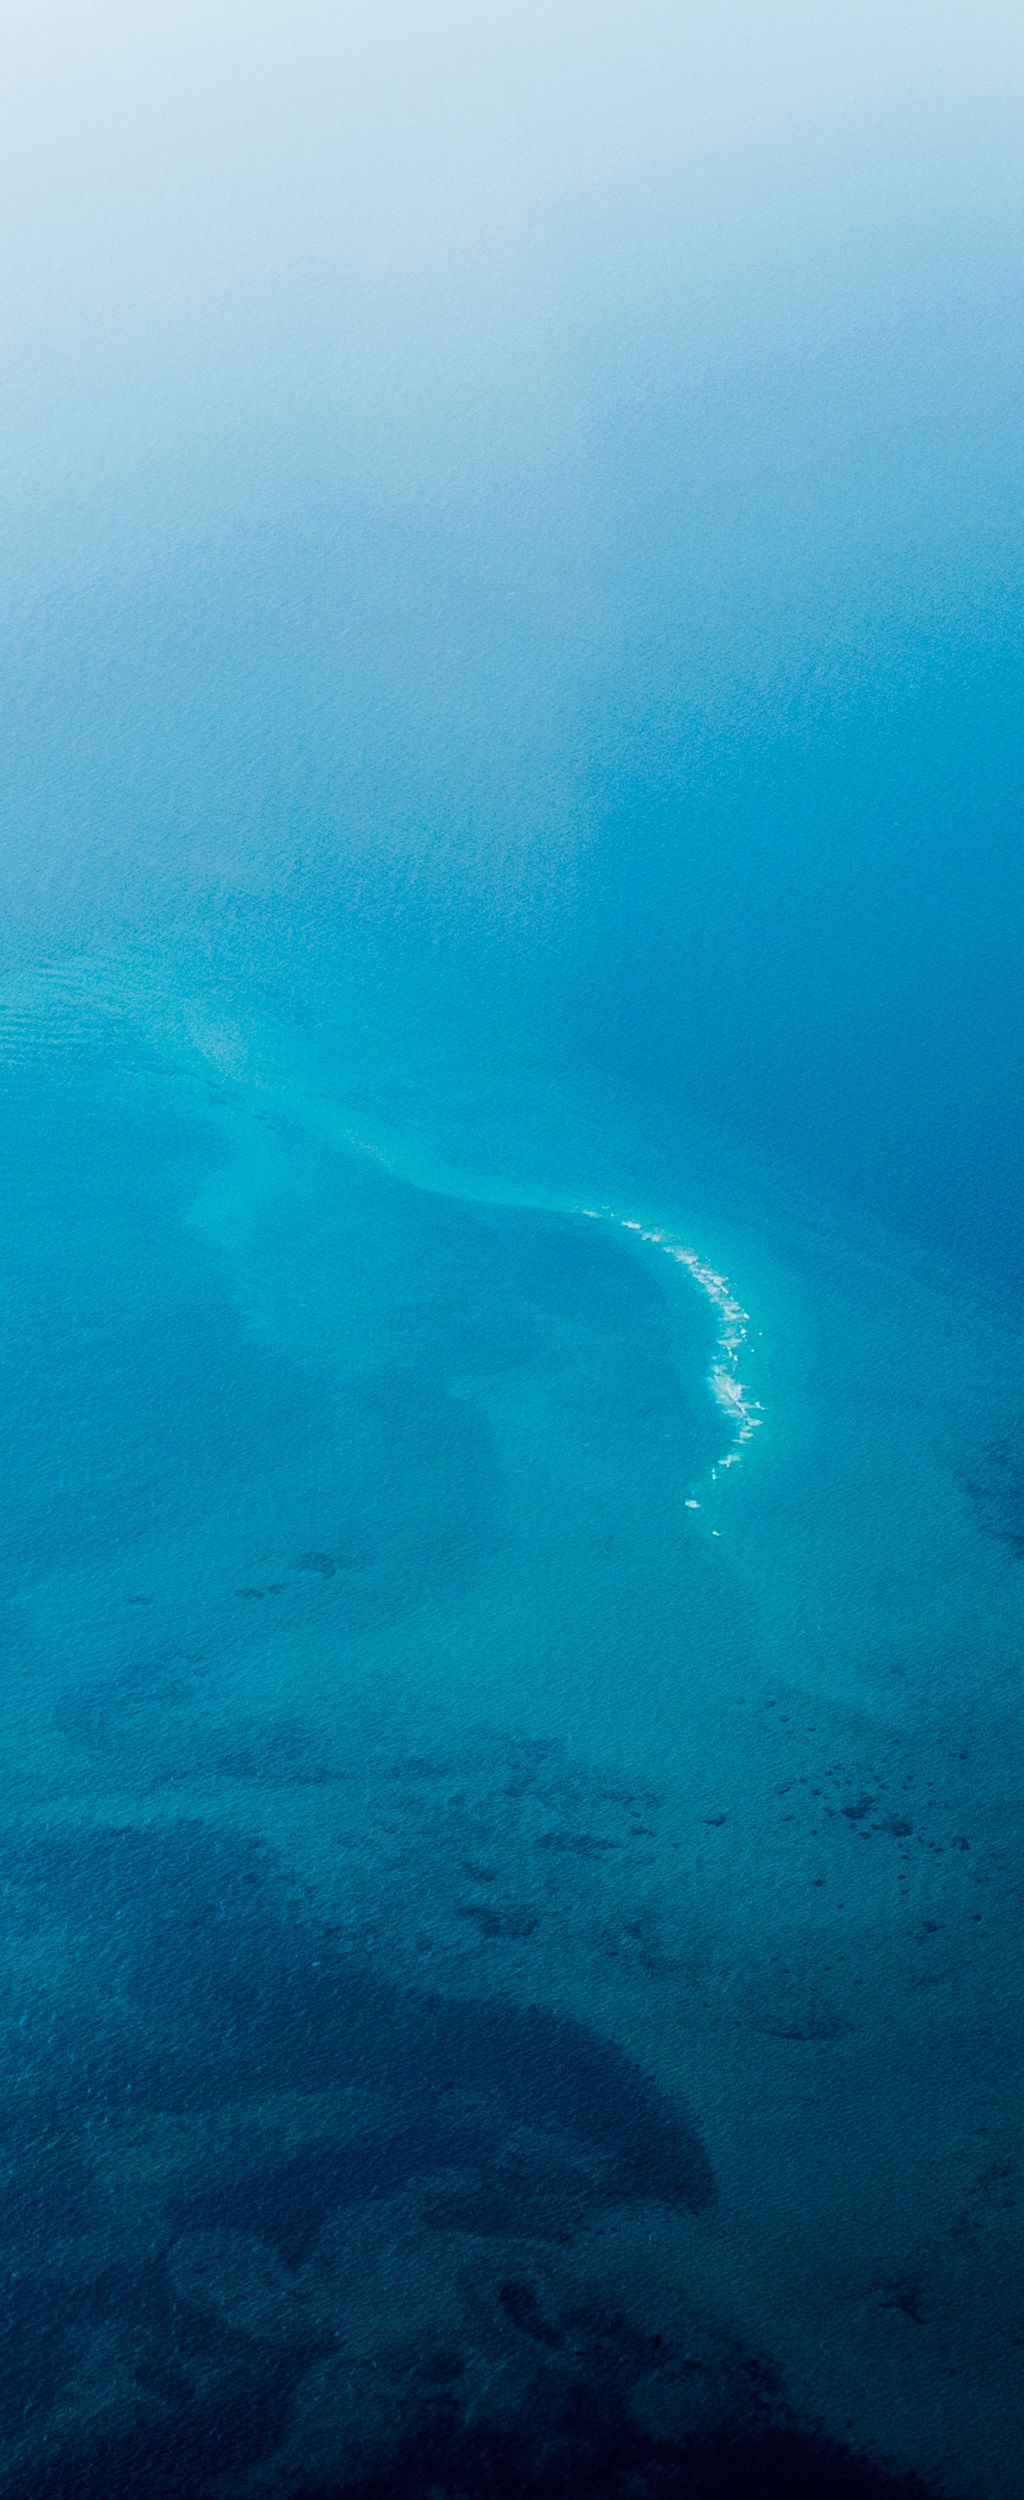 An aerial view of sea currents and a reef in the open ocean.